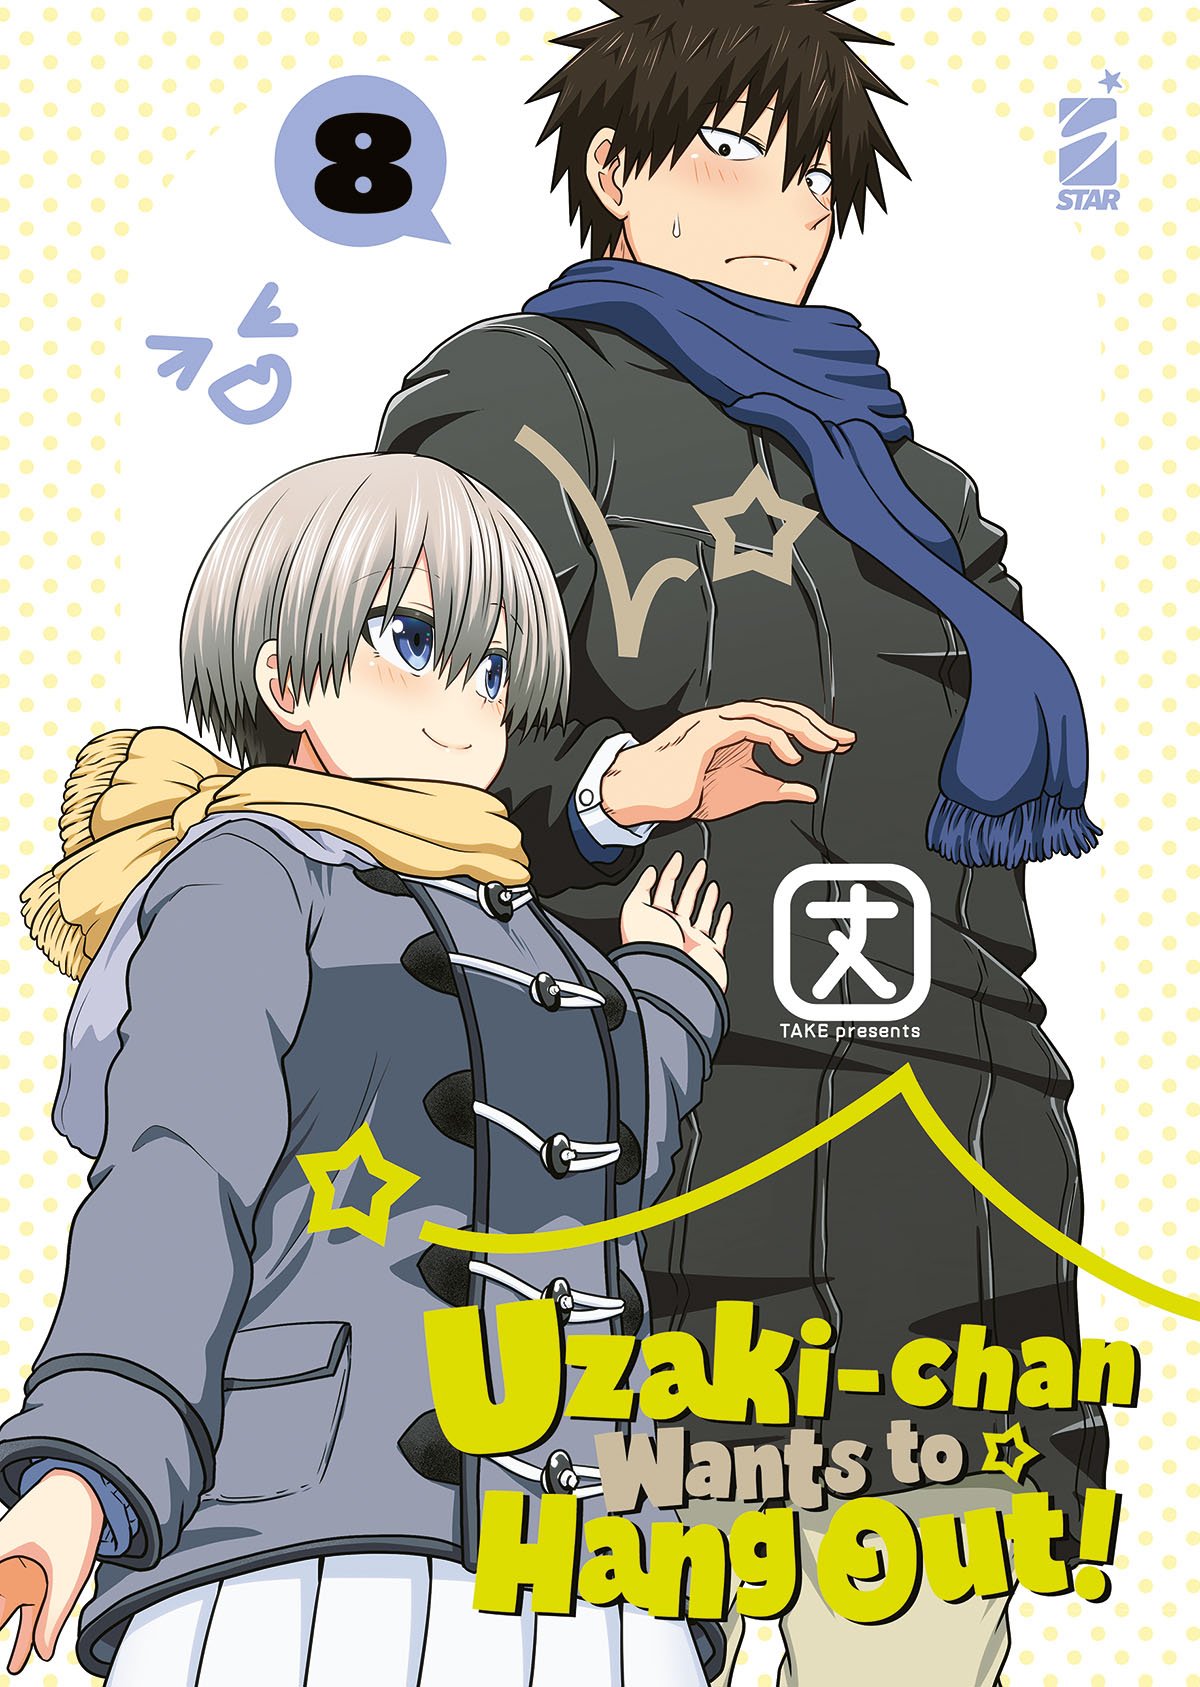 UZAKI-CHAN WANTS TO HANG OUT 8 UP 219